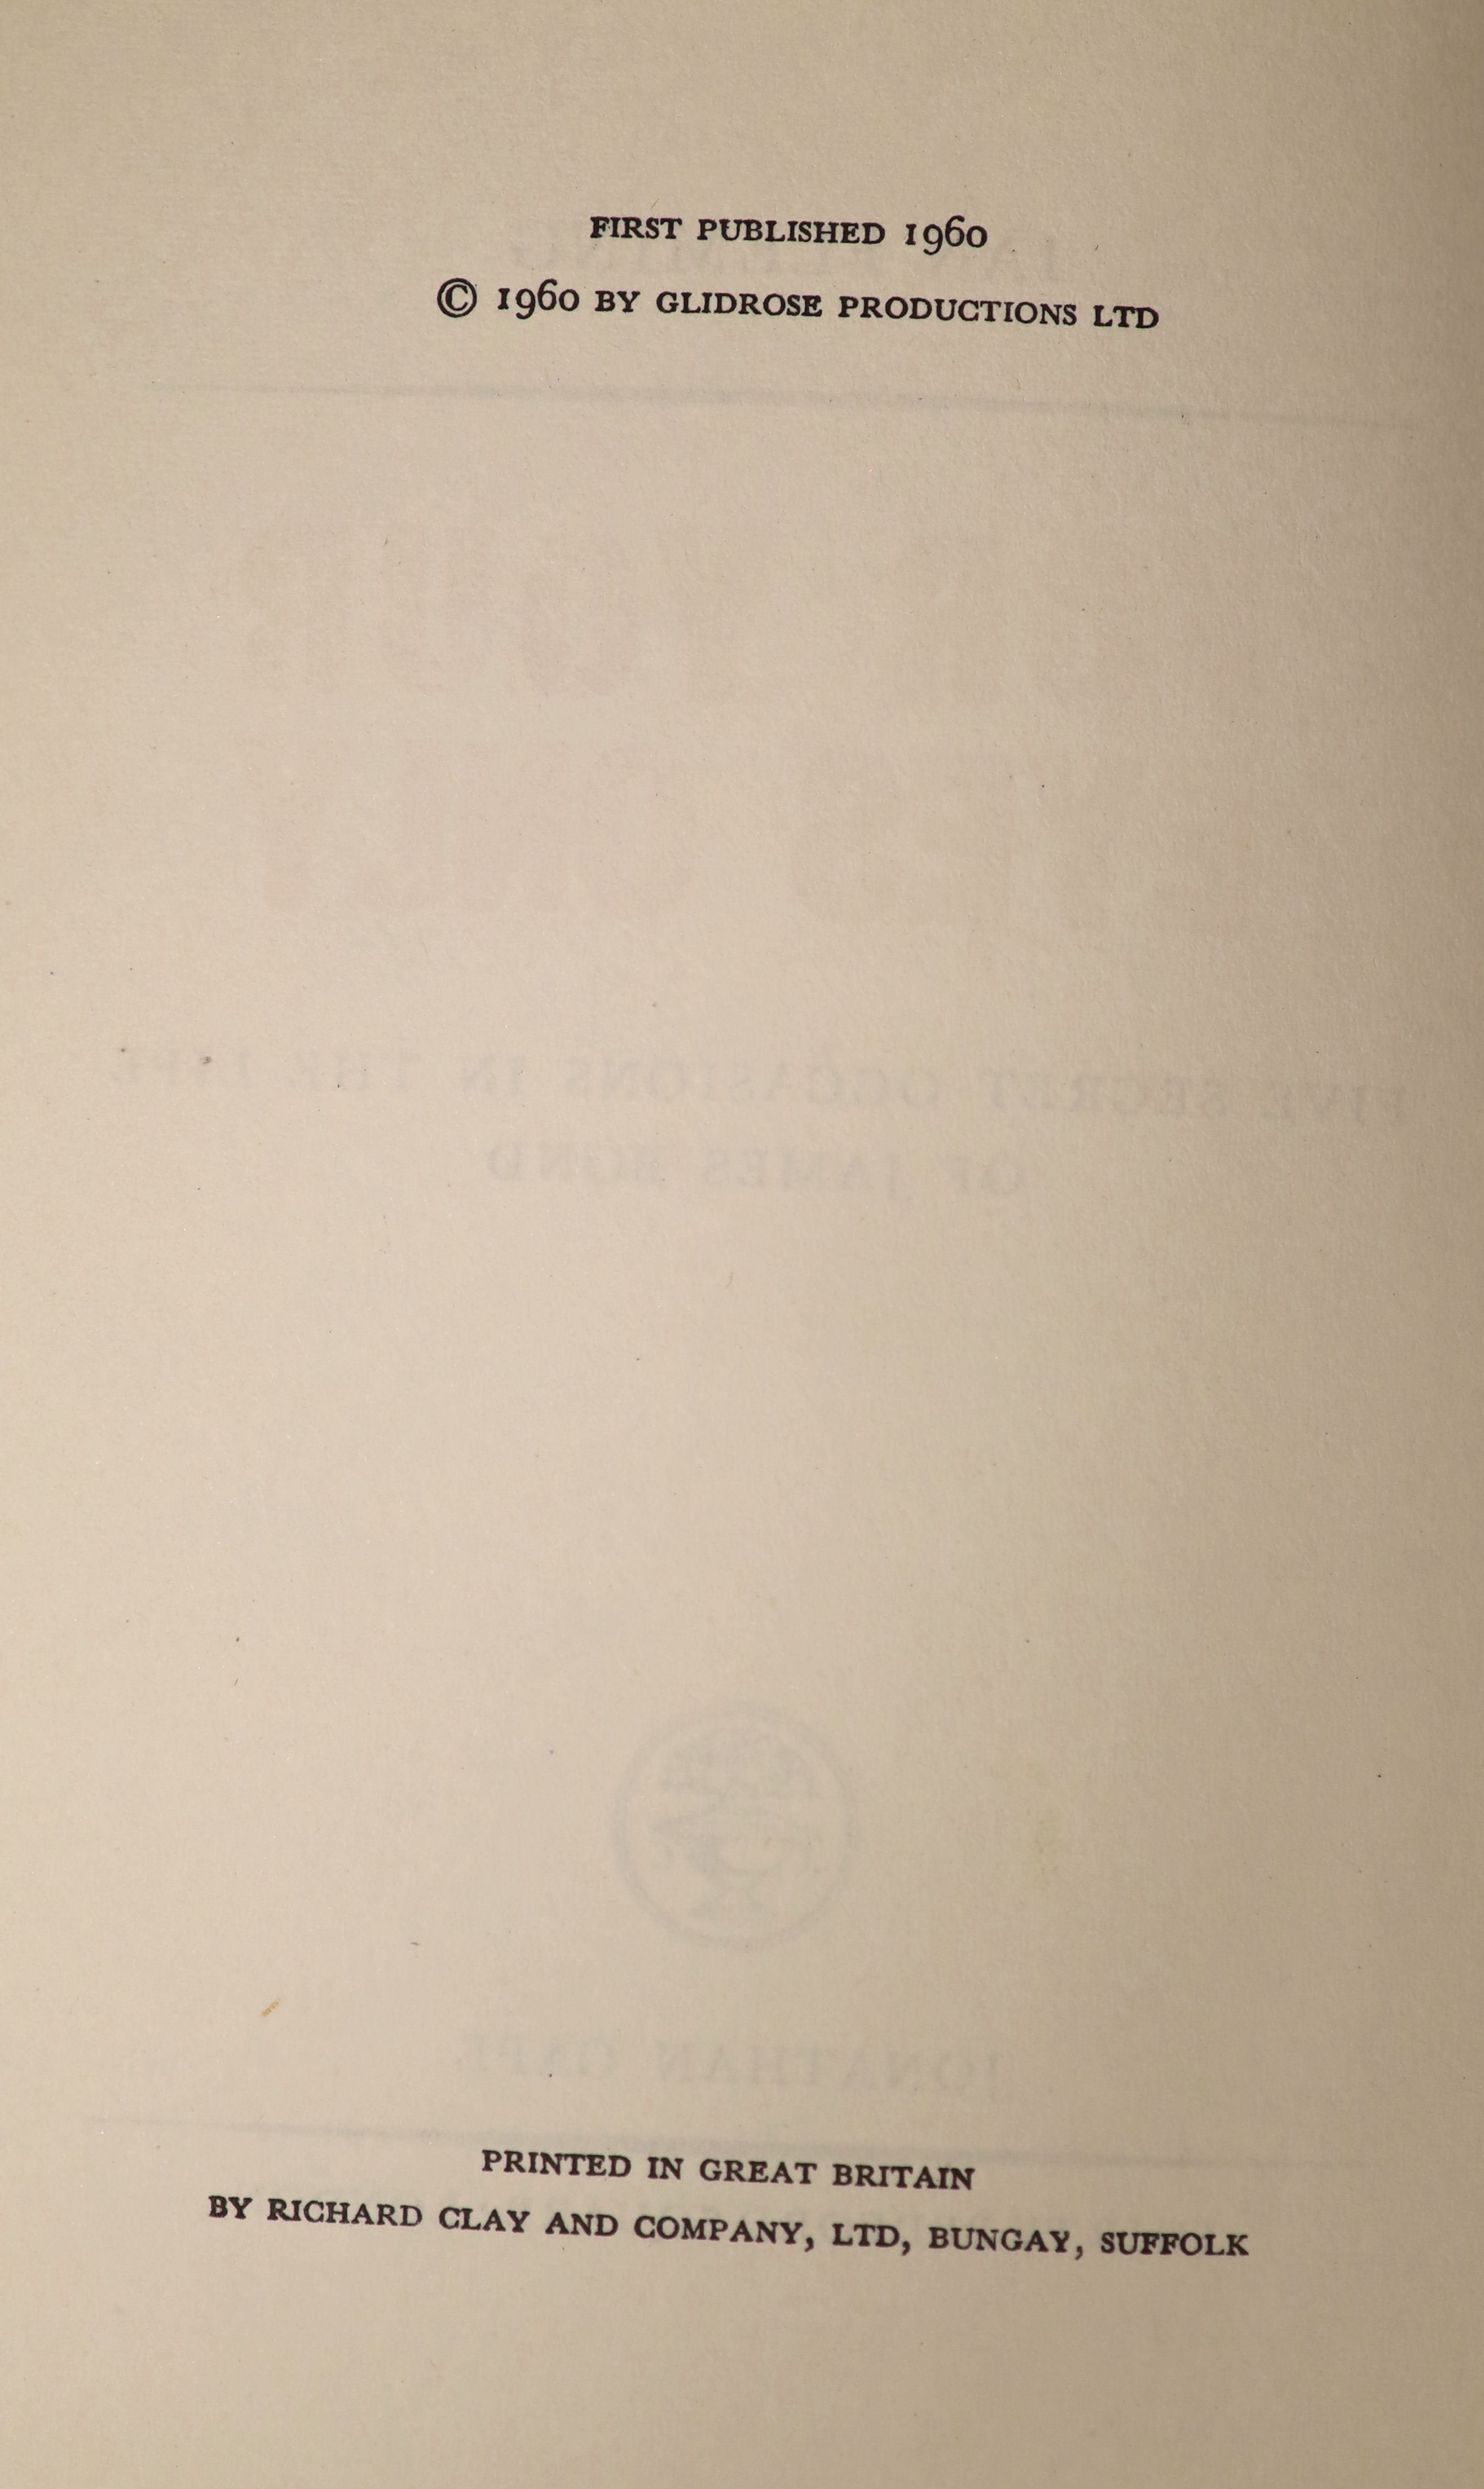 Fleming, Ian - For Yor Eyes Only, 1st edition, 1st impression, original cloth with biro inscribed date to front fly leaf, in clipped d/j designed by Richard Chopping, London, 1960